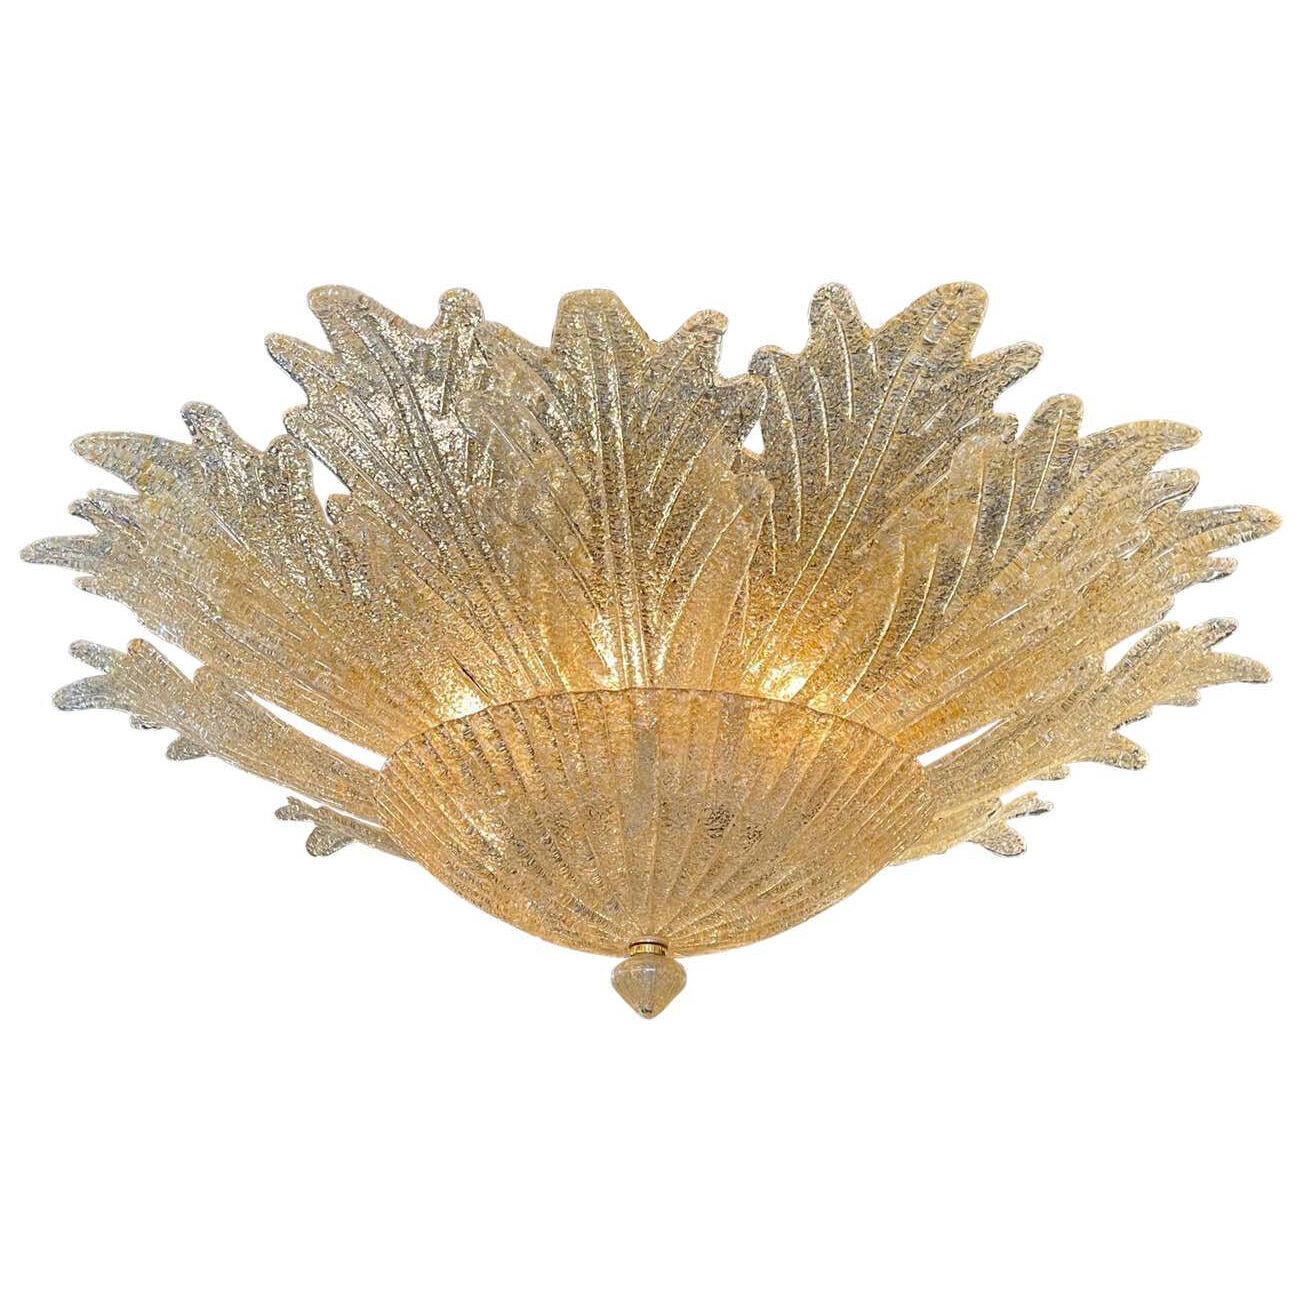 Murano Glass Gold Flecked Leaf Form Ceiling Mount Fixture